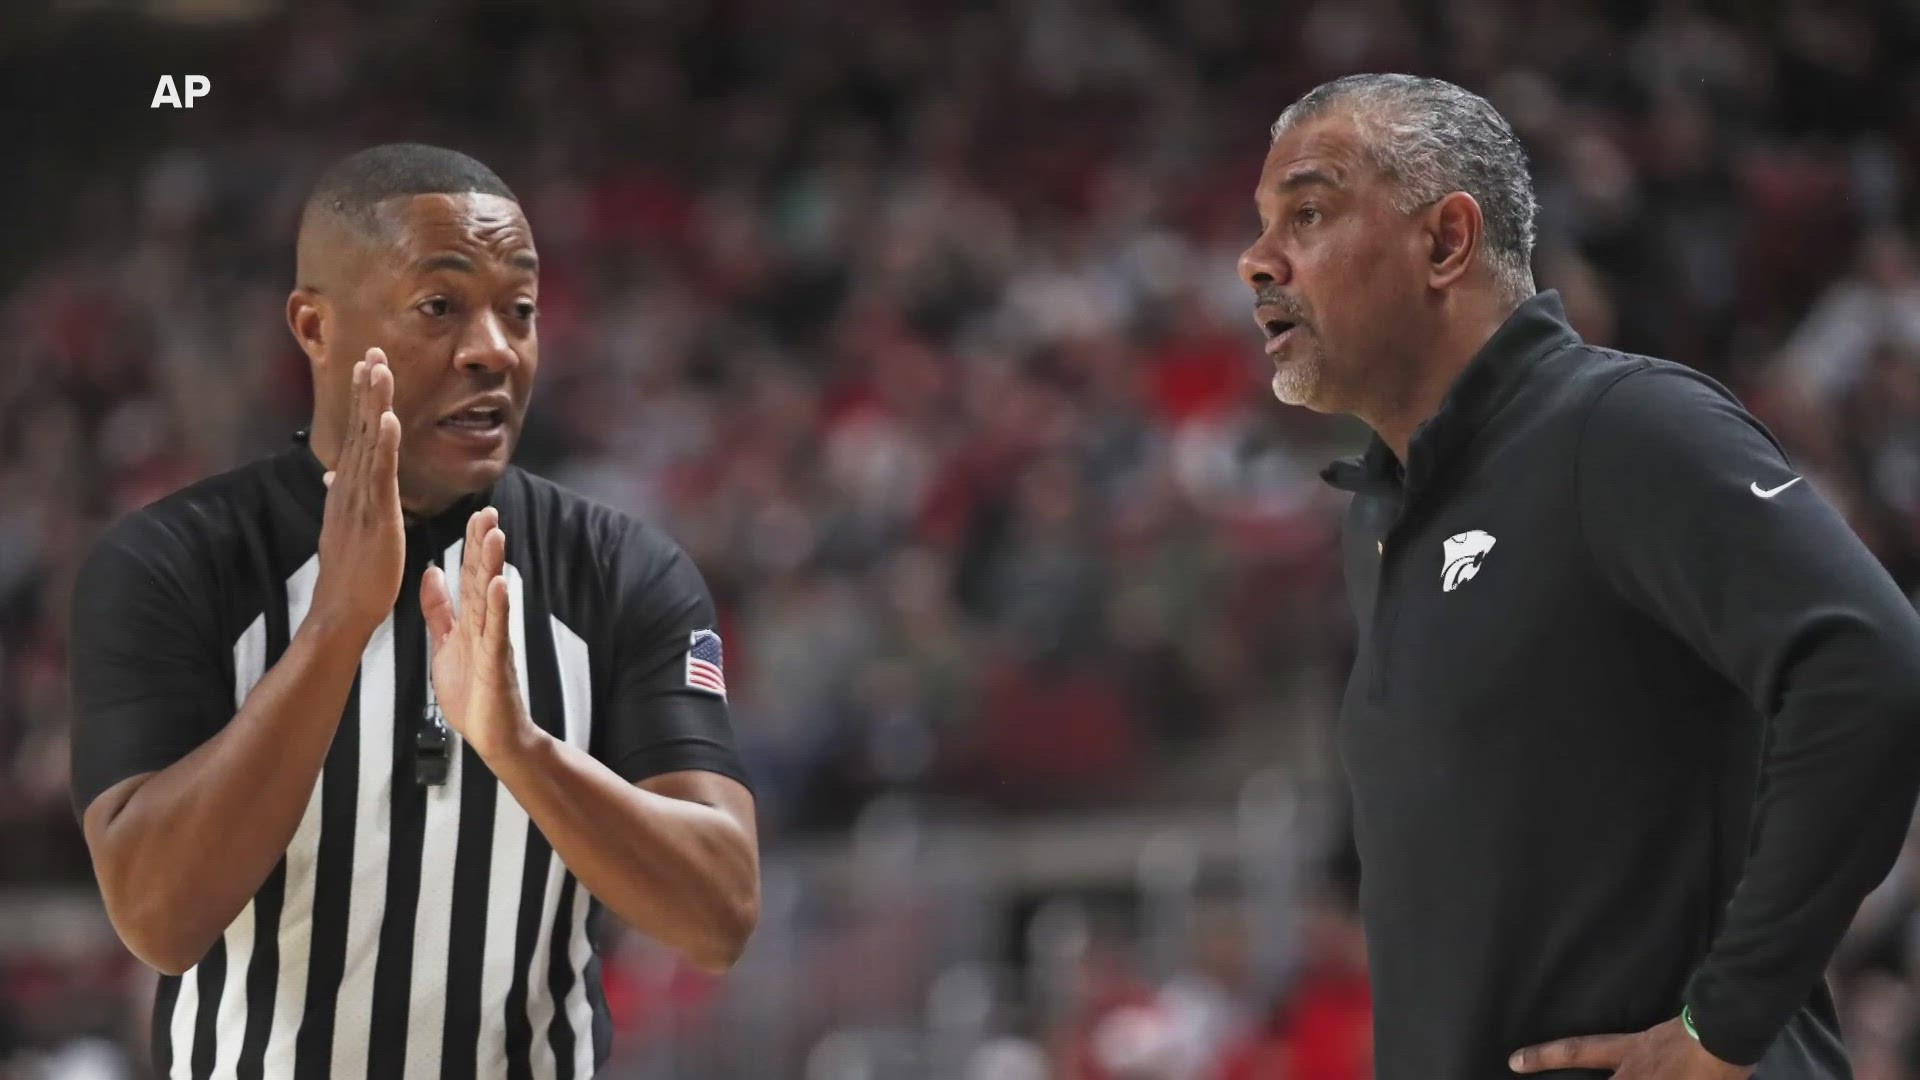 Keith Kimble donned the whistle at April's National Championship Game, his second time achieving the honor.